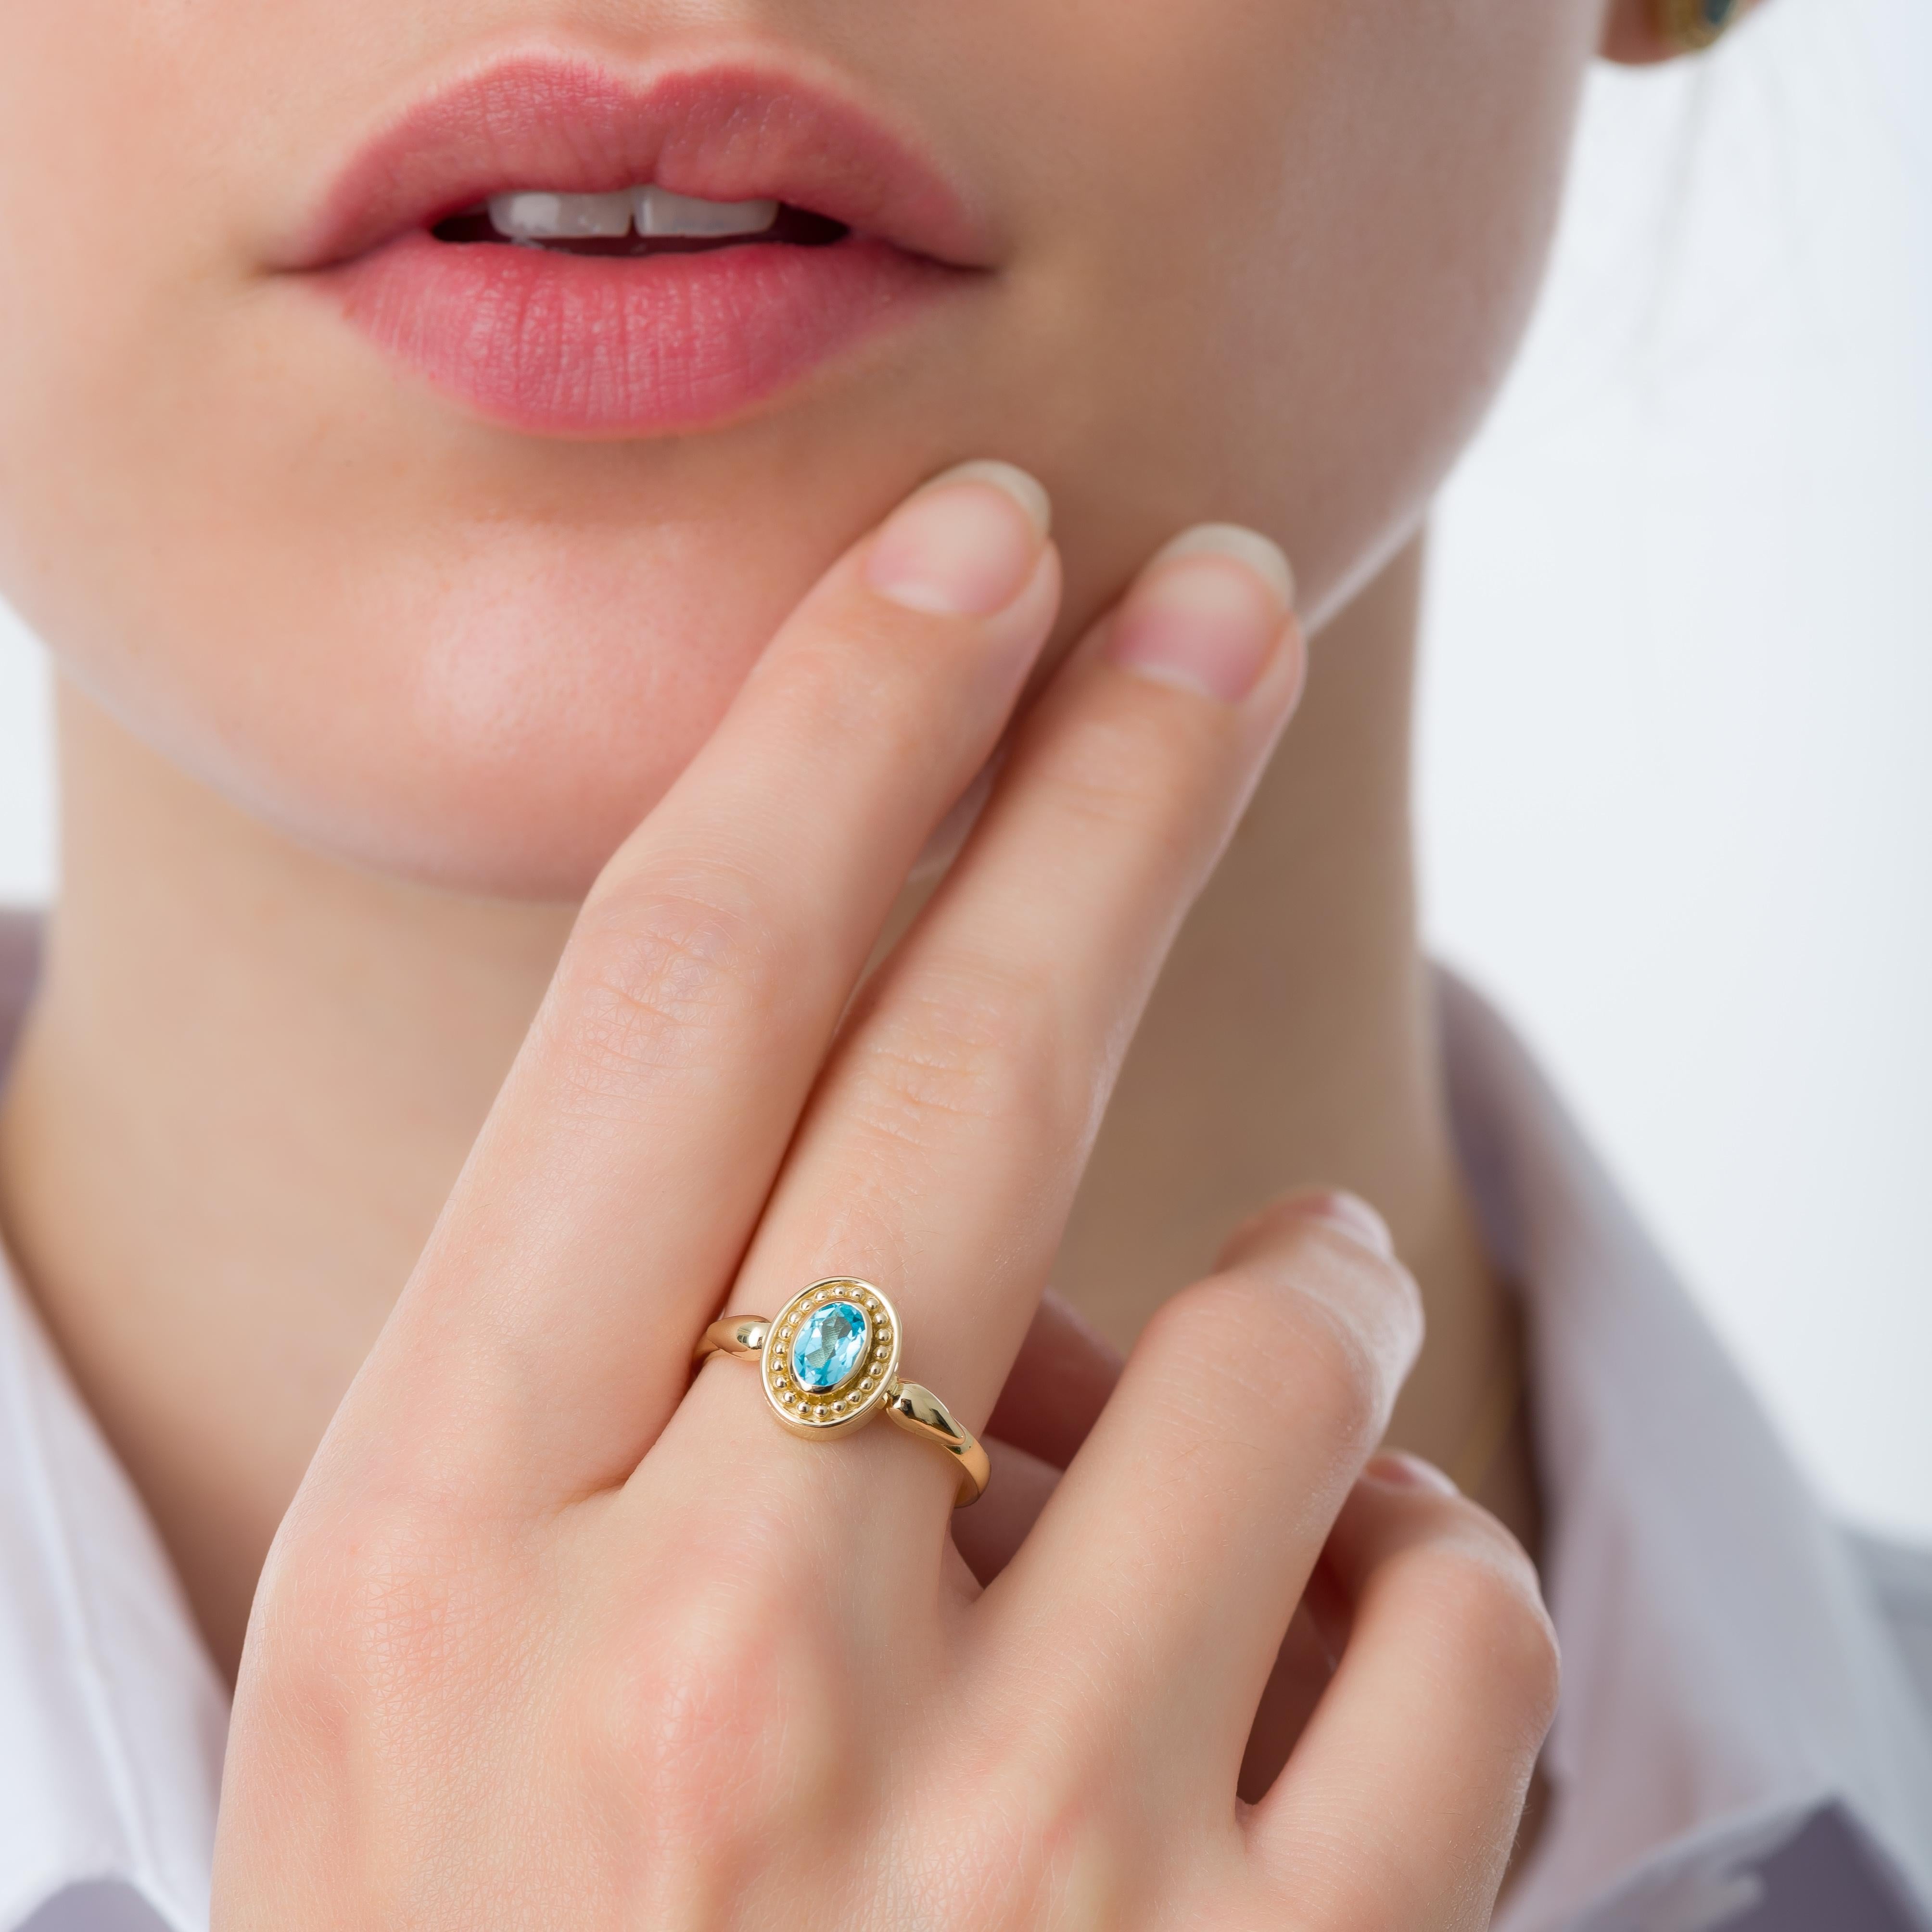 An enchanting oval Swiss topaz, cradled within a gold ring, whispers tales of nature's elegance and timeless allure, inviting you to embrace its captivating charm.

100% handmade in our workshop.

Metal: 18K Gold
Gemstones: Swiss Blue Topaz  weight